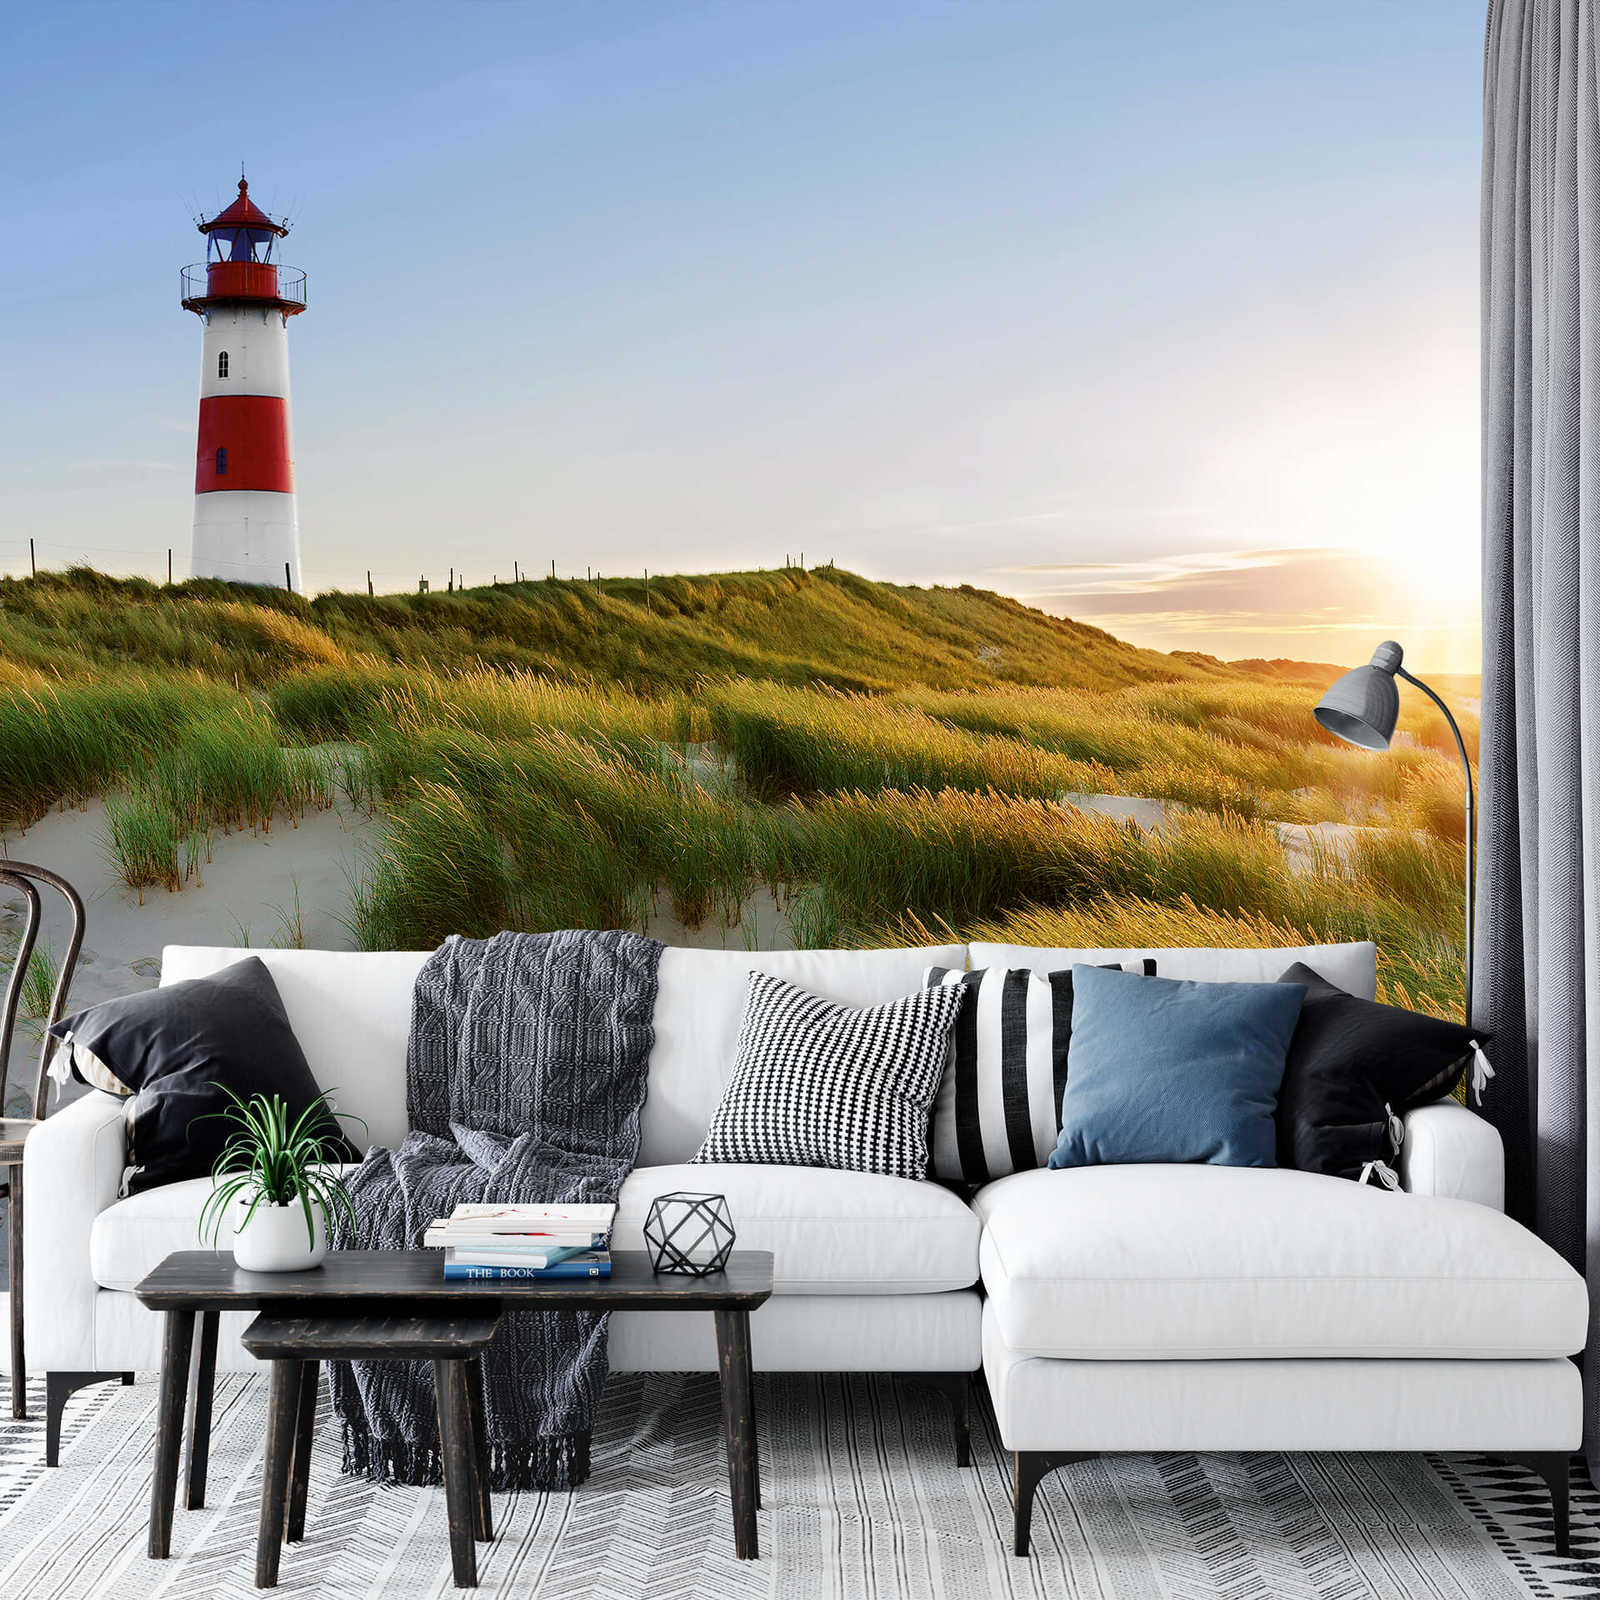             Beach mural with dunes and lighthouse
        